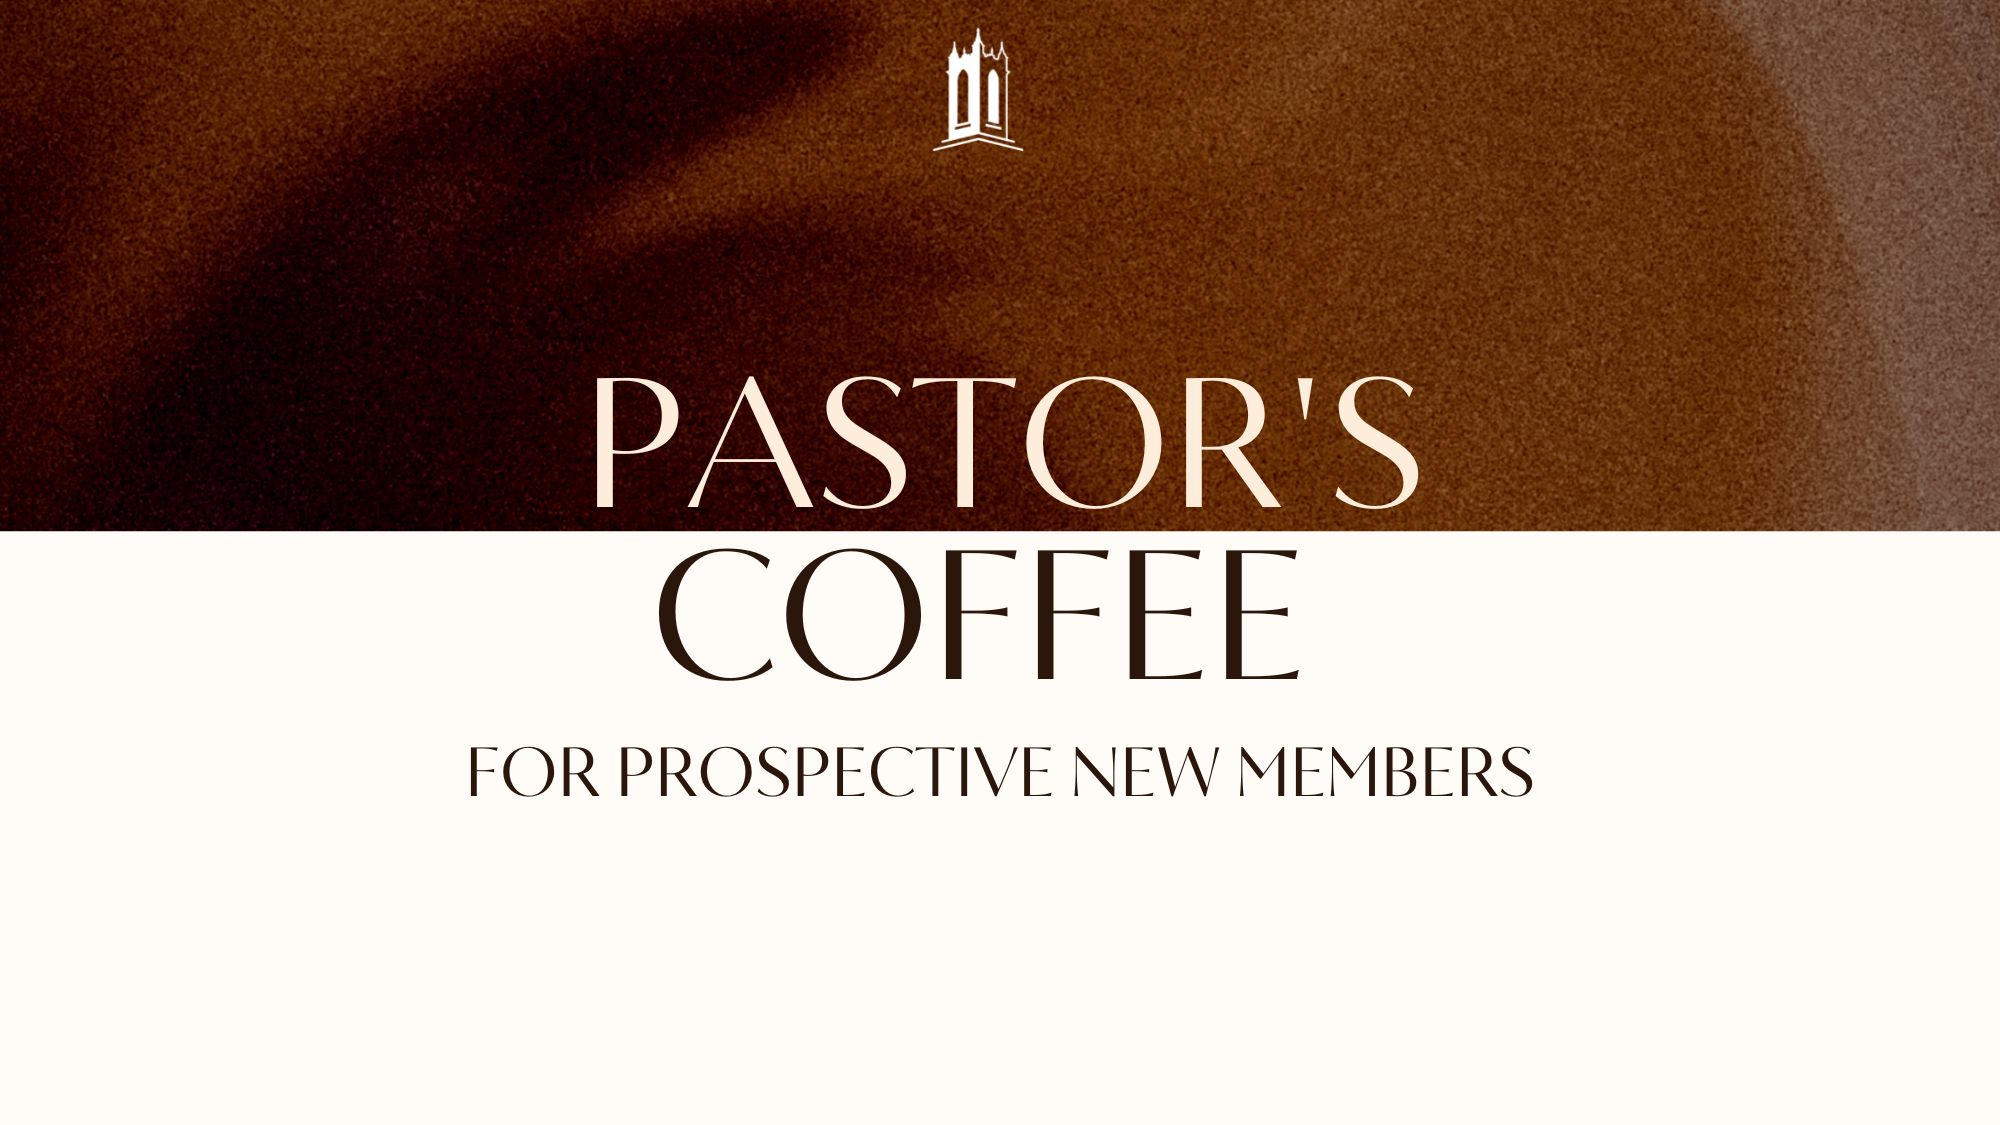 Pastor's Coffee for Prospective New Members